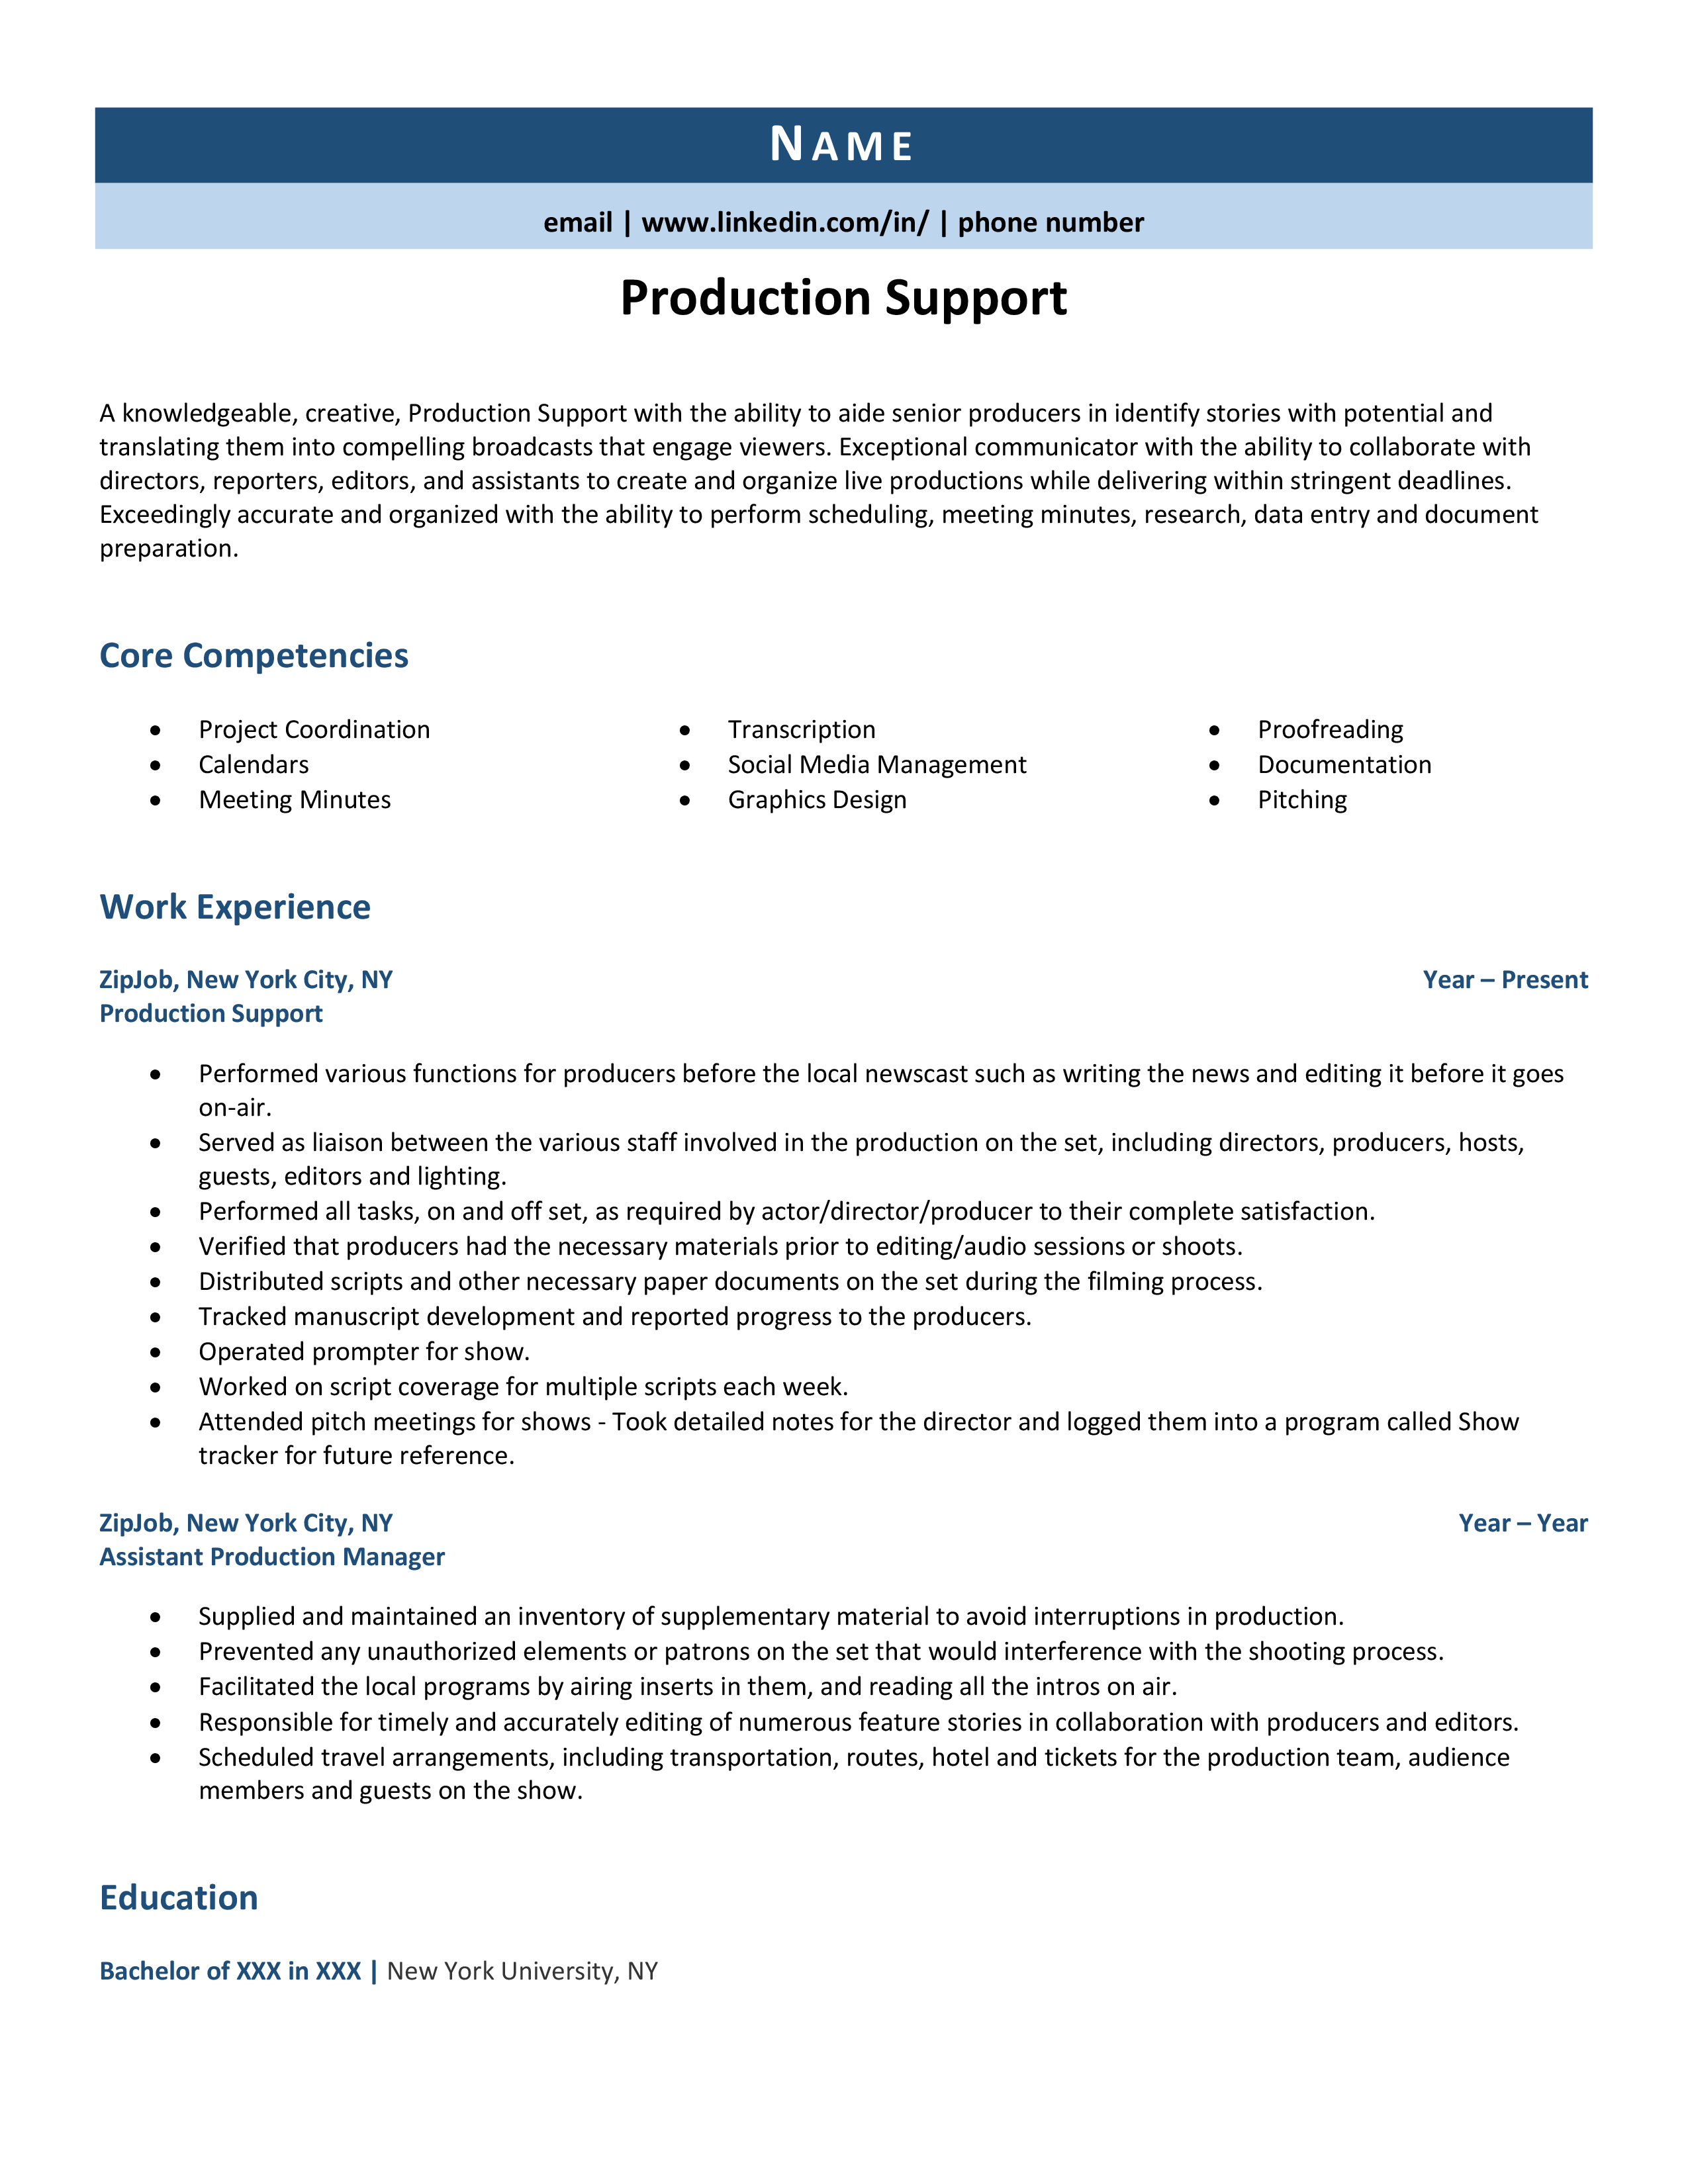 Production Support Resume Example And Guide Zipjob